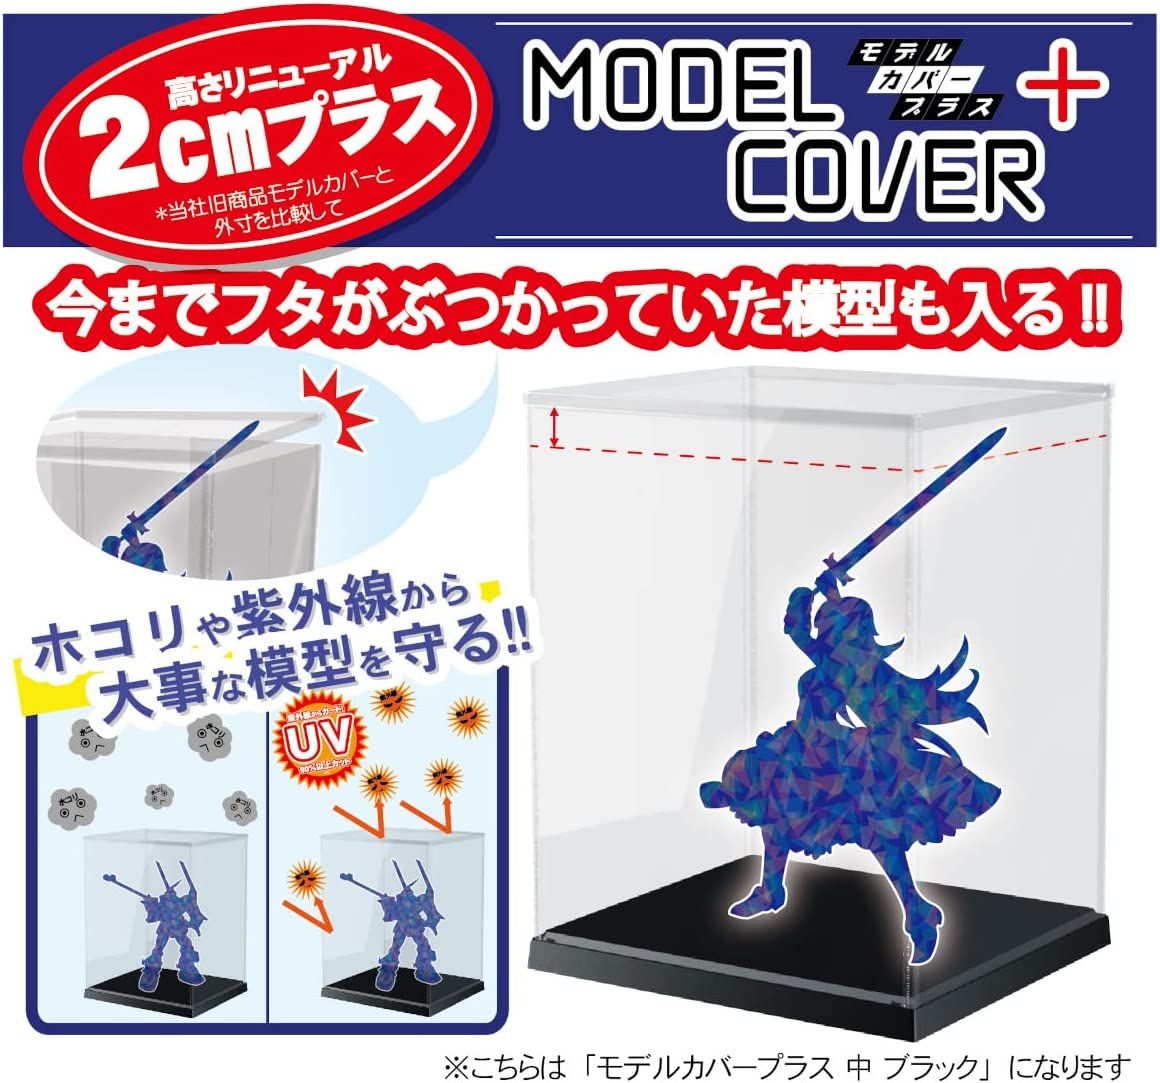 Hobby Base K103MB Model Cover Plus Extra Large Clear Marine Blue - BanzaiHobby